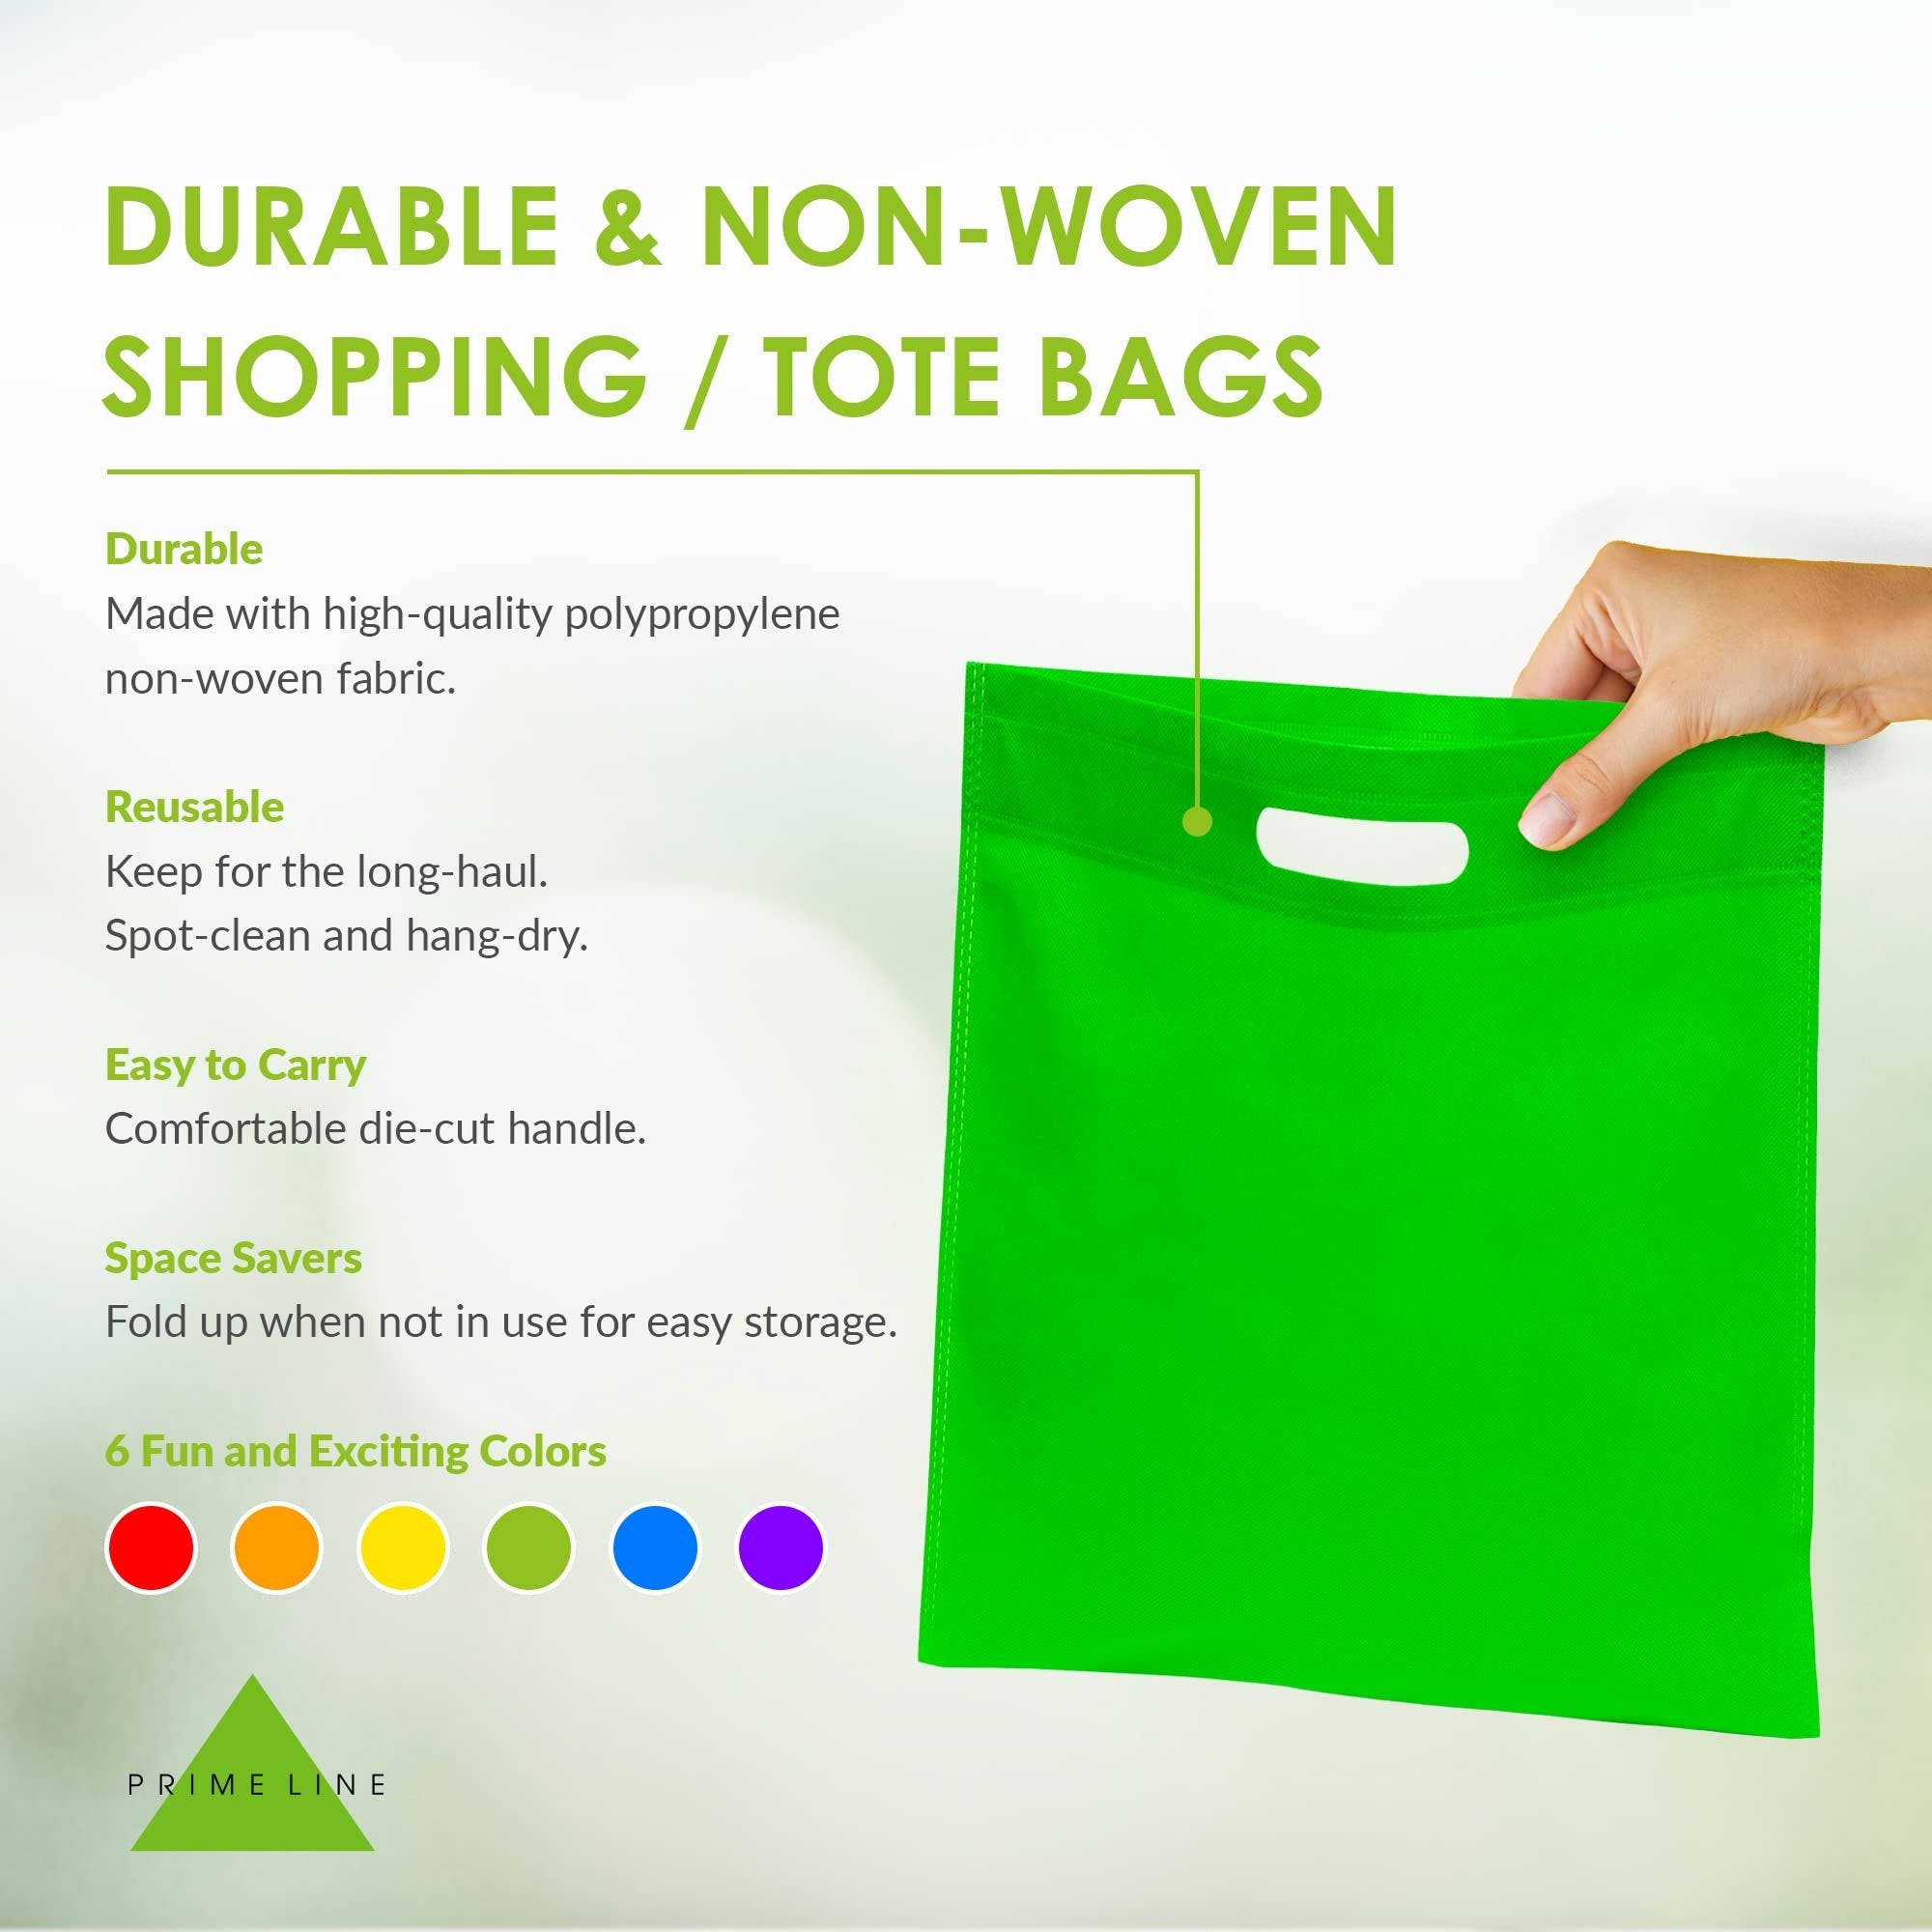 25 Pack Multicolor Cloth Bags - Reusable Thank You Totes for Retail & Small Business (15x16)